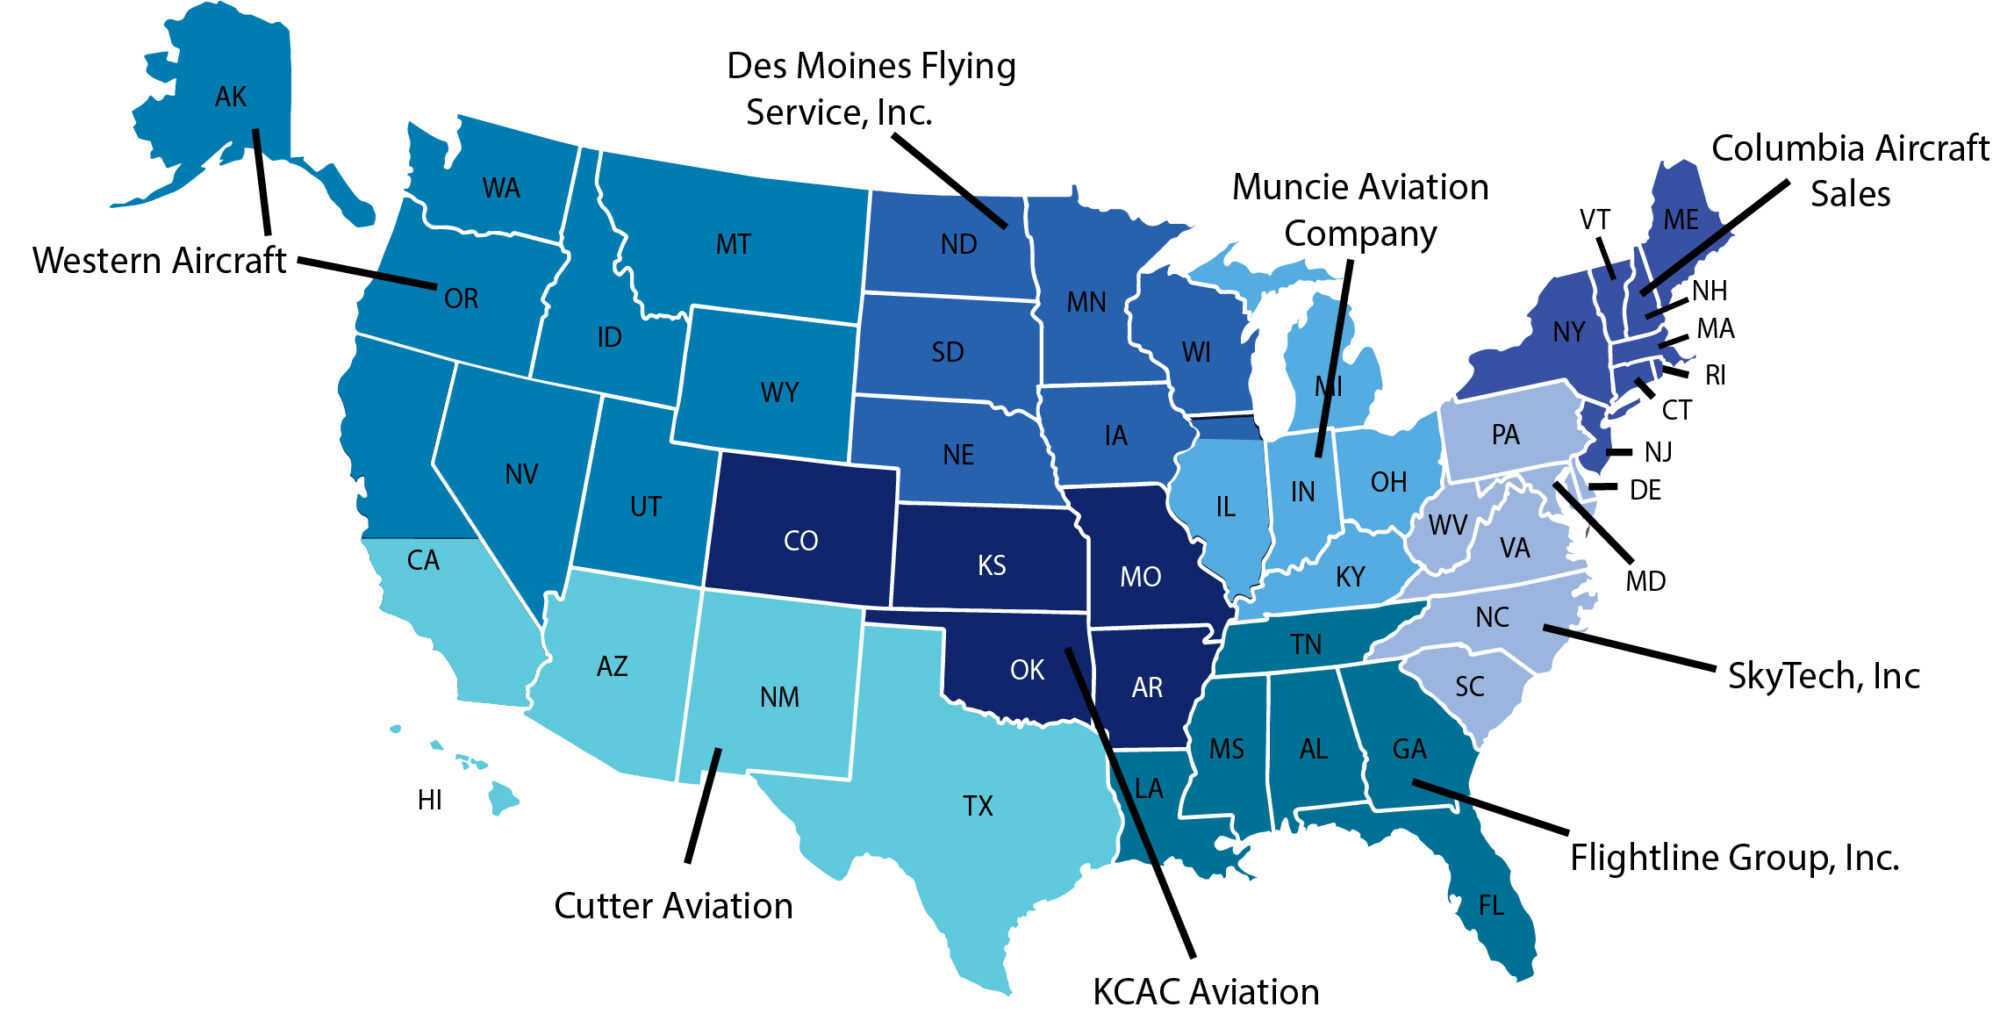 A map of the United States showing different Piper Aircraft dealers